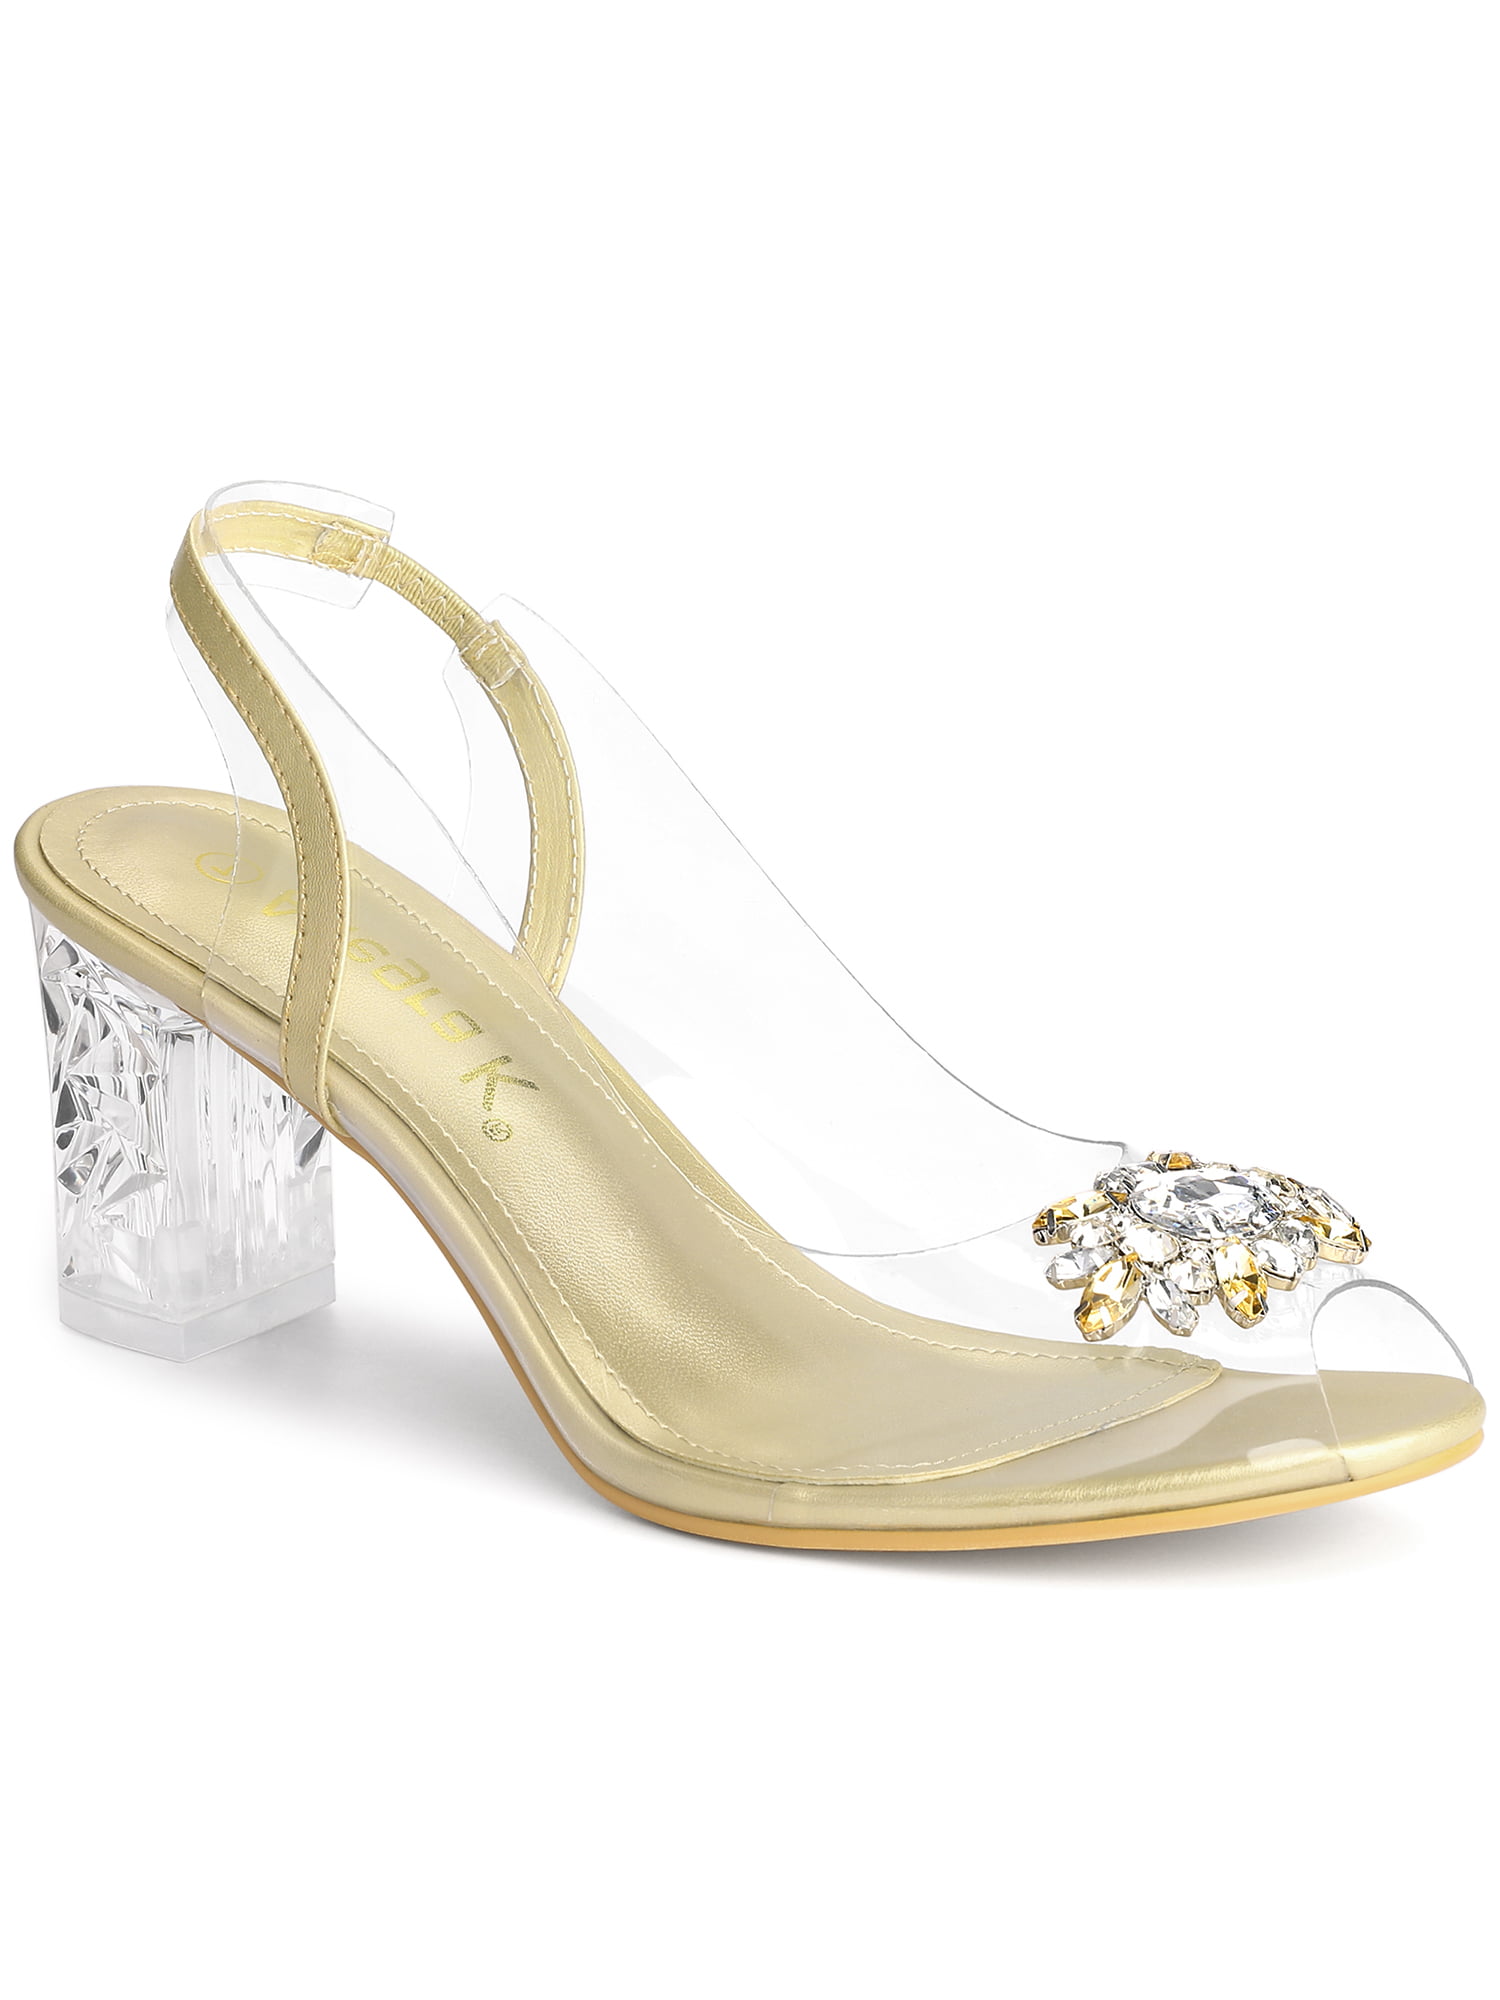 Amazon.com: Heeled Sandals for Women Bridal Shoes Block Heel, Women's Heeled  Sandal with Rhinestones Satin Chunky Heels Ankle Strap Wedding Sandals  Bridal (Color : Yellow, Size : 6 UK) : Clothing, Shoes & Jewelry